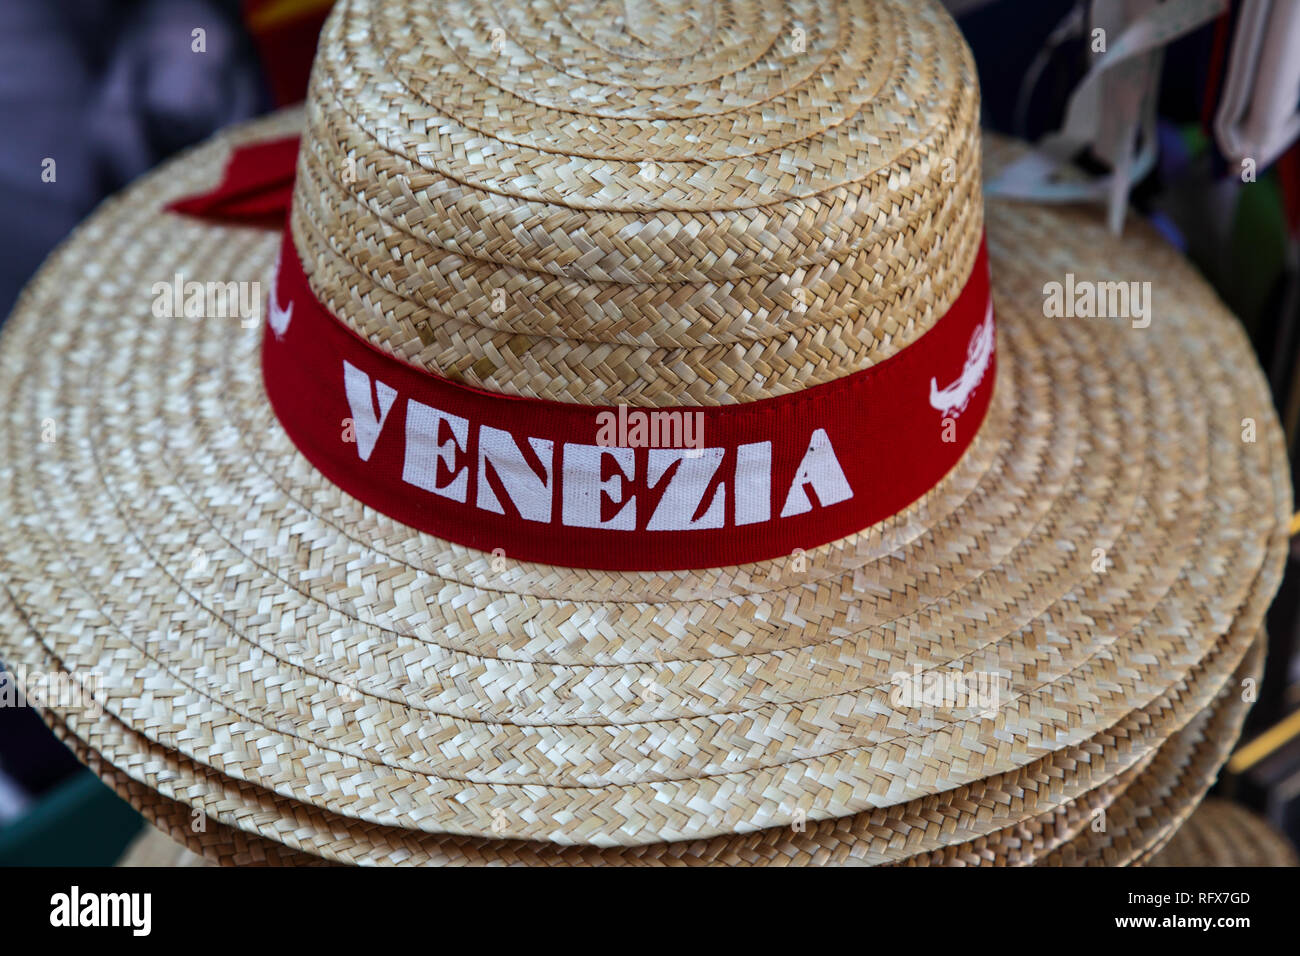 Straw hat emblazoned with 'Venezia' which are popular with tourists in Venice. Stock Photo